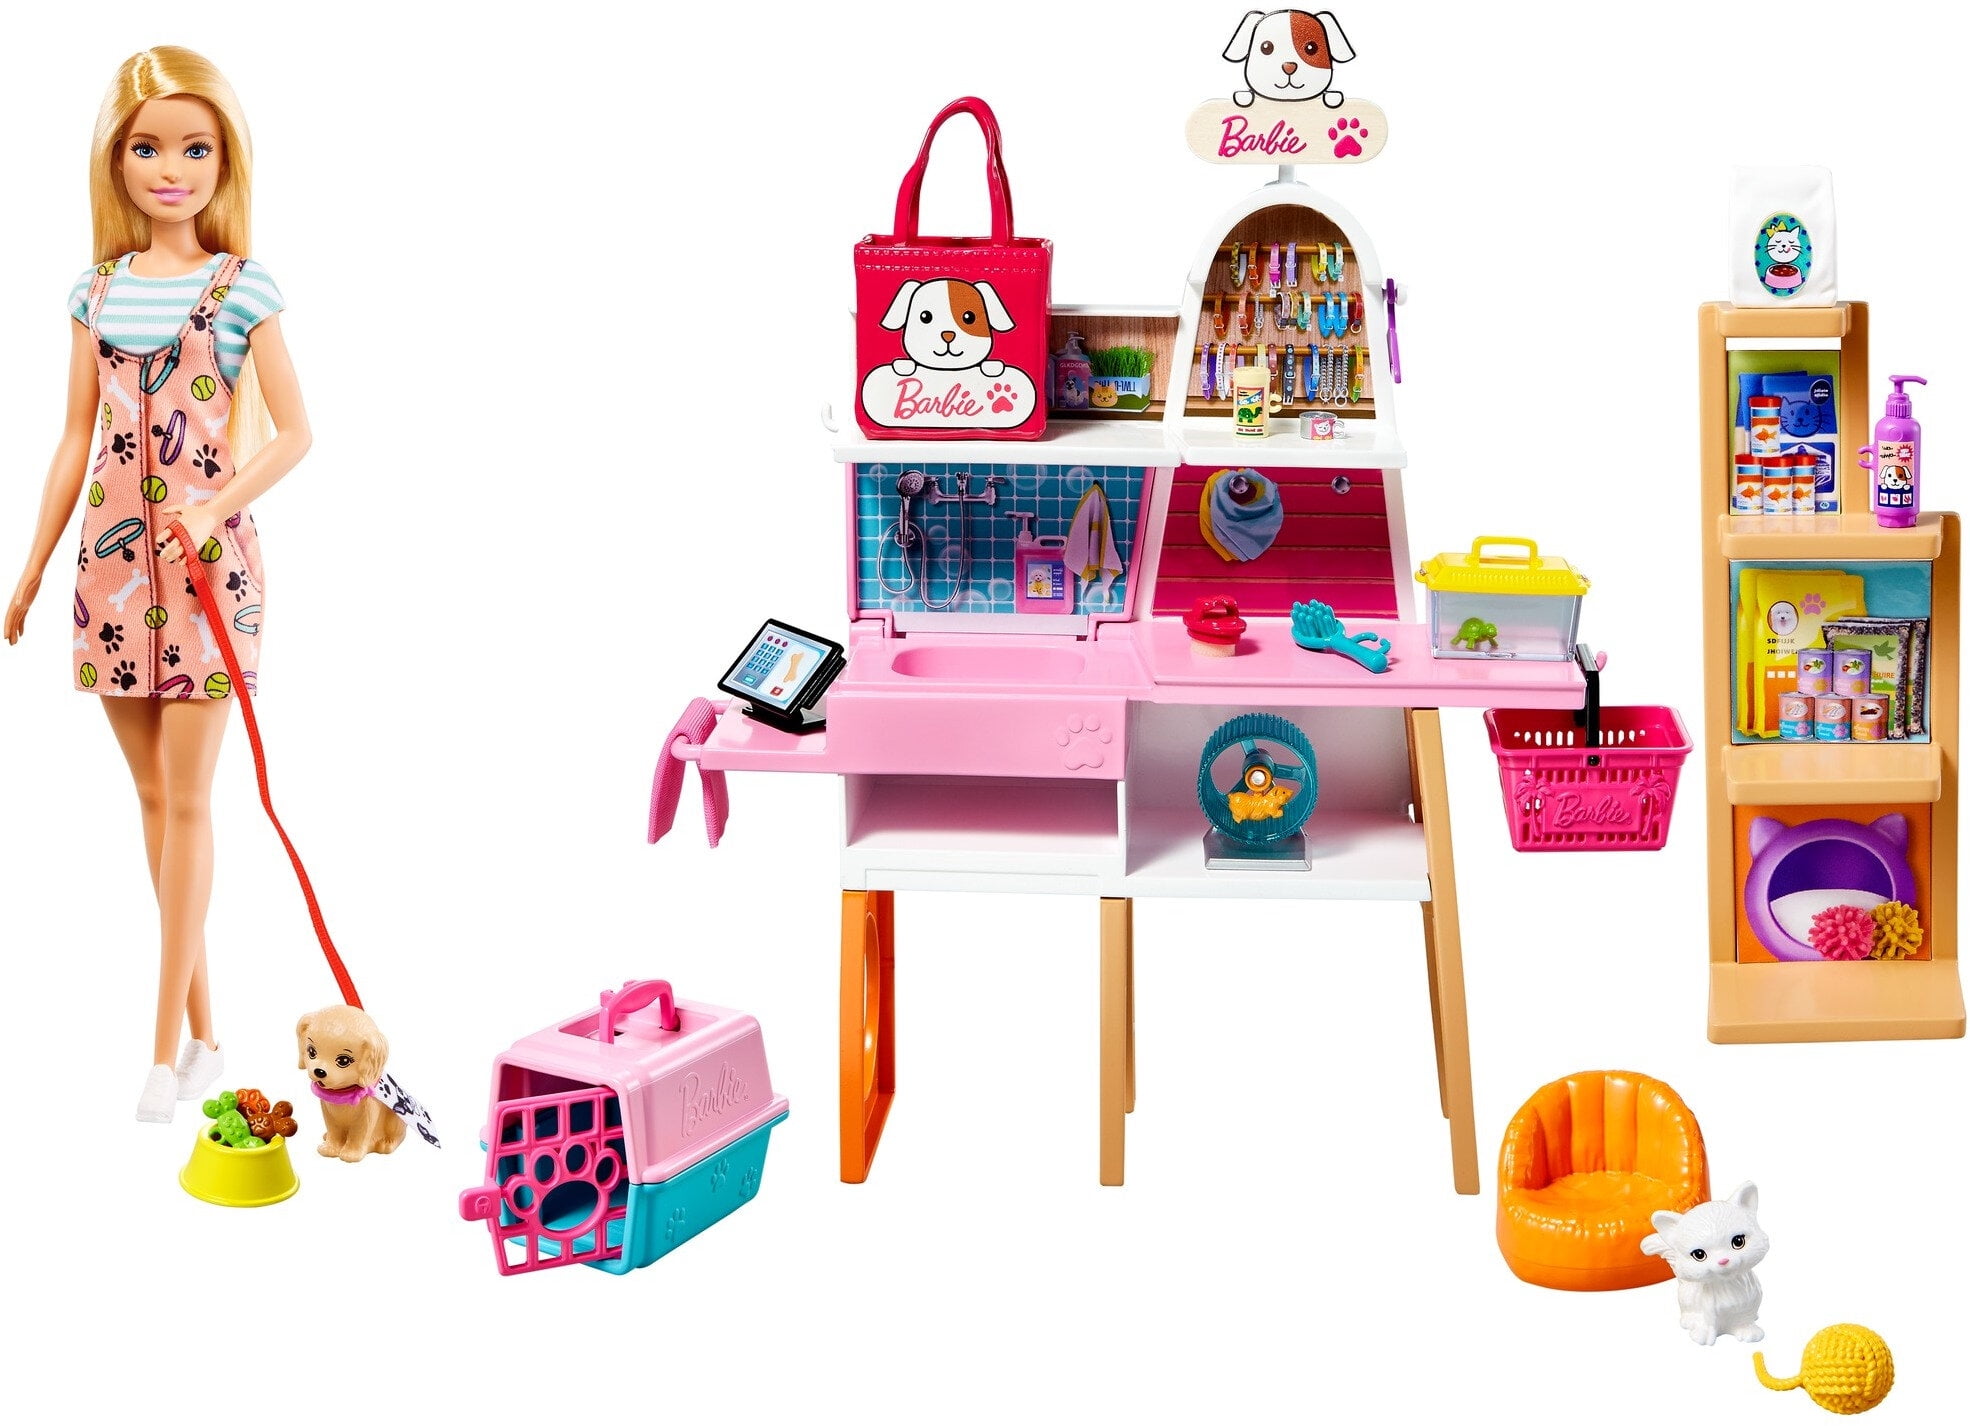 Barbie Doll and Pet Boutique Playset with 4 Pets and Accessories, for 3 to 7 Year Olds